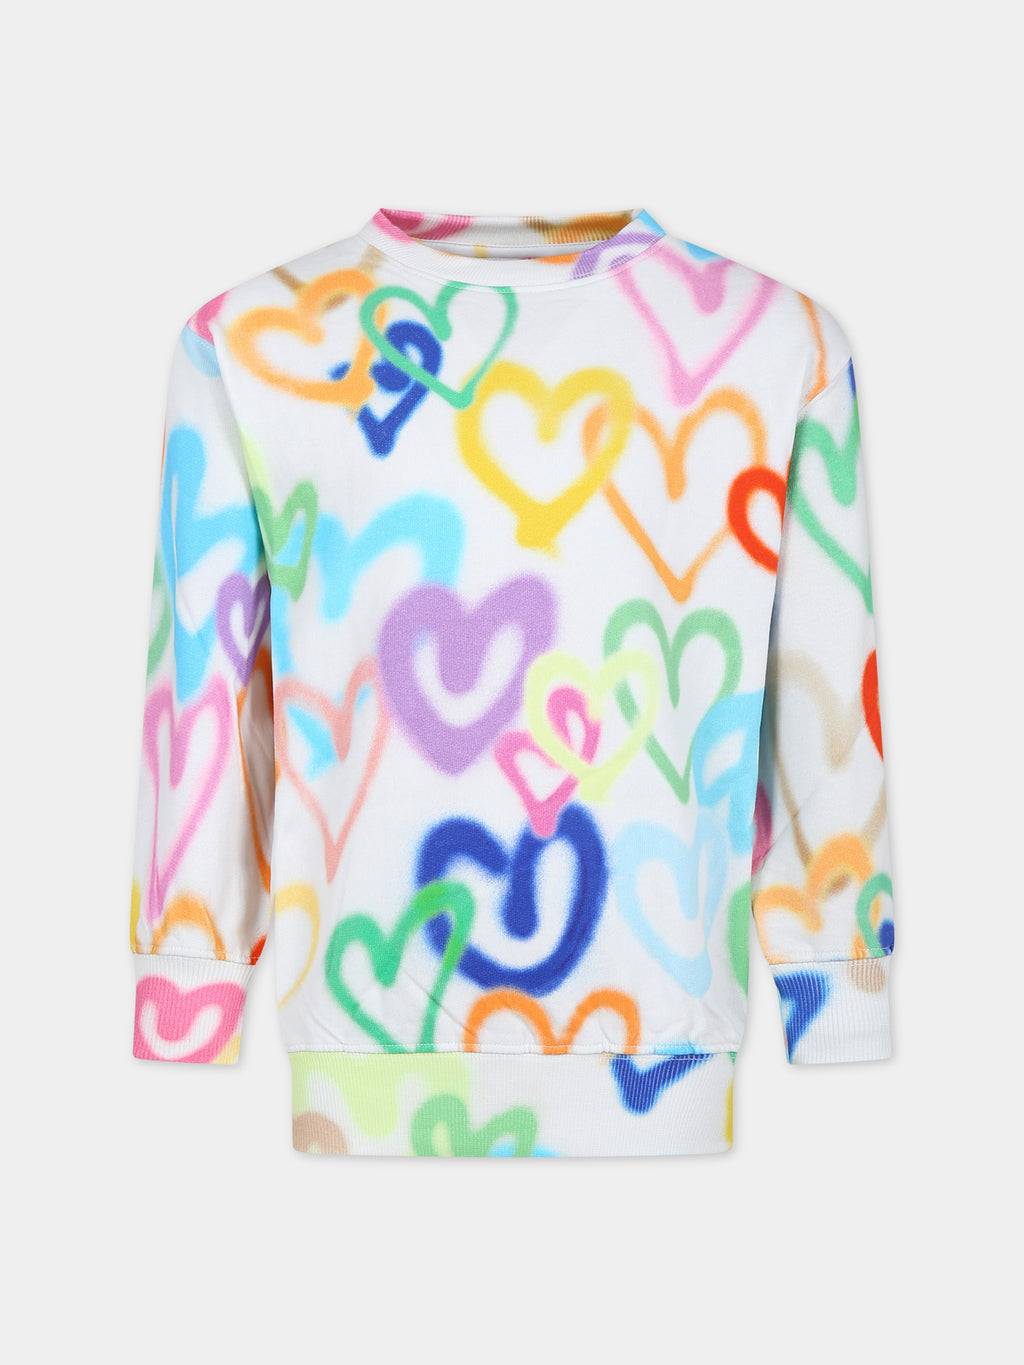 White sweatshirt for kids with multicolor hearts